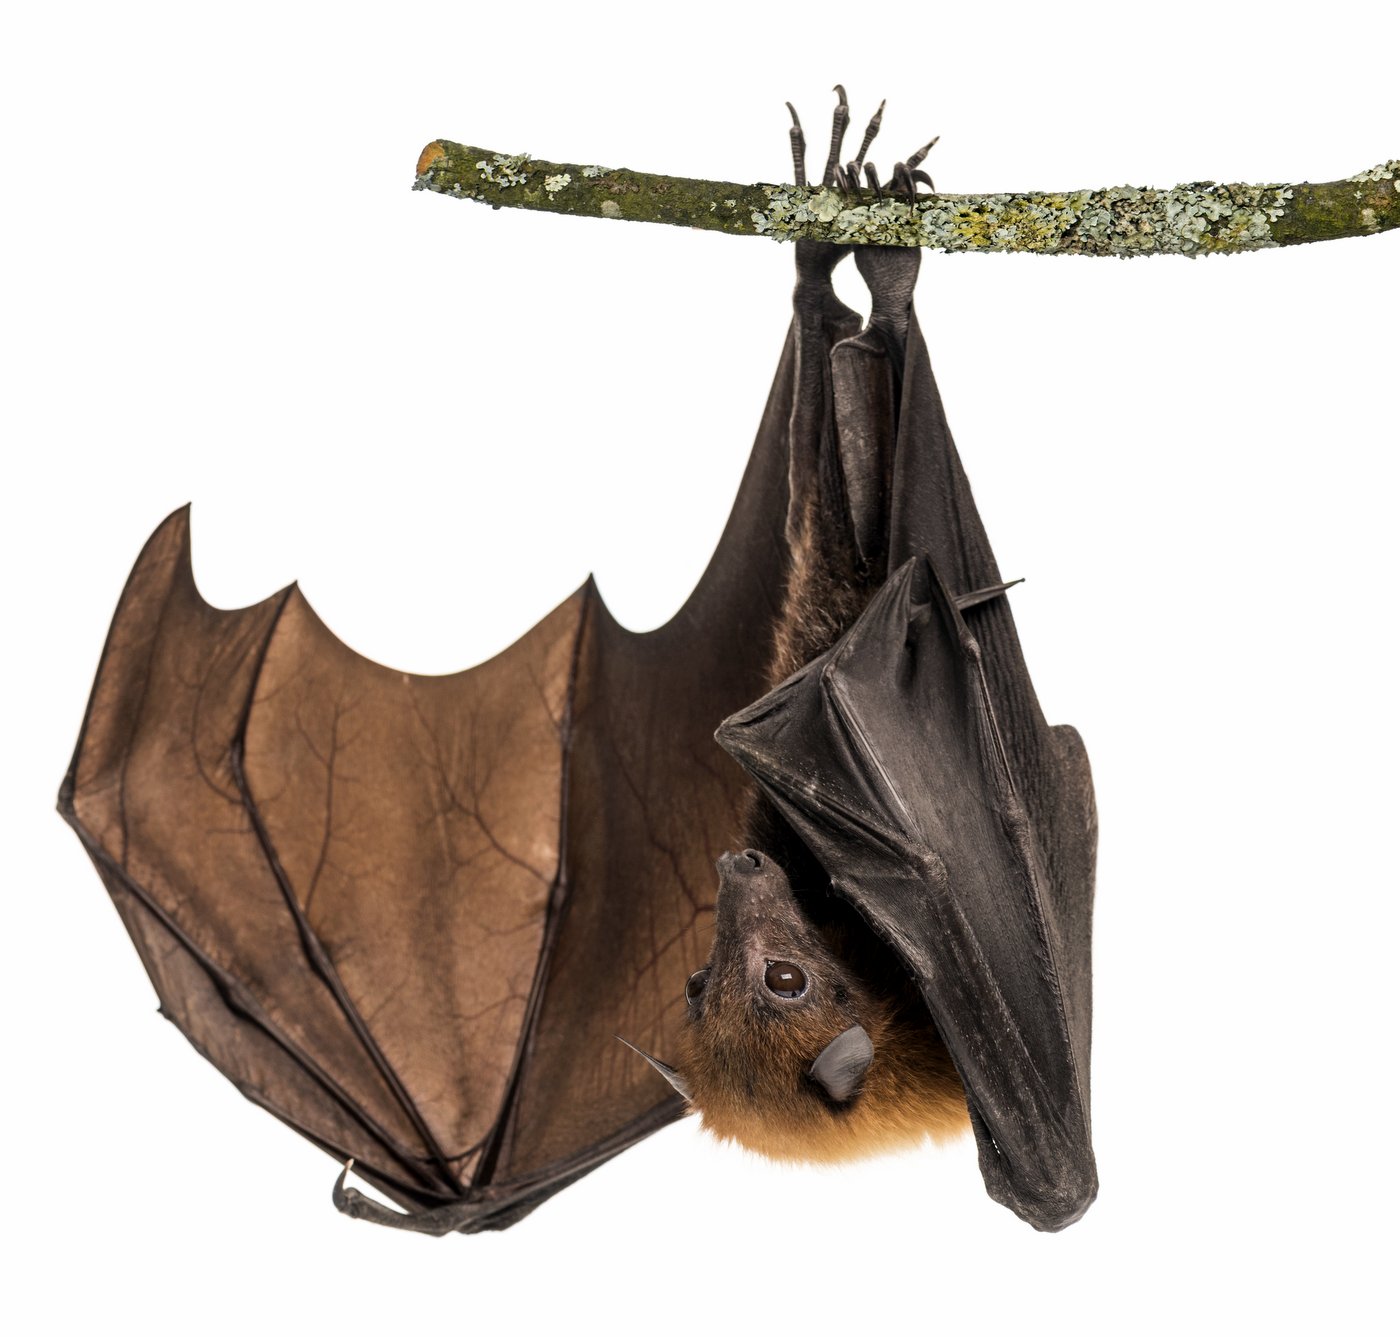 Lyle's flying fox hanging from a branch, Pteropus lylei, isolated